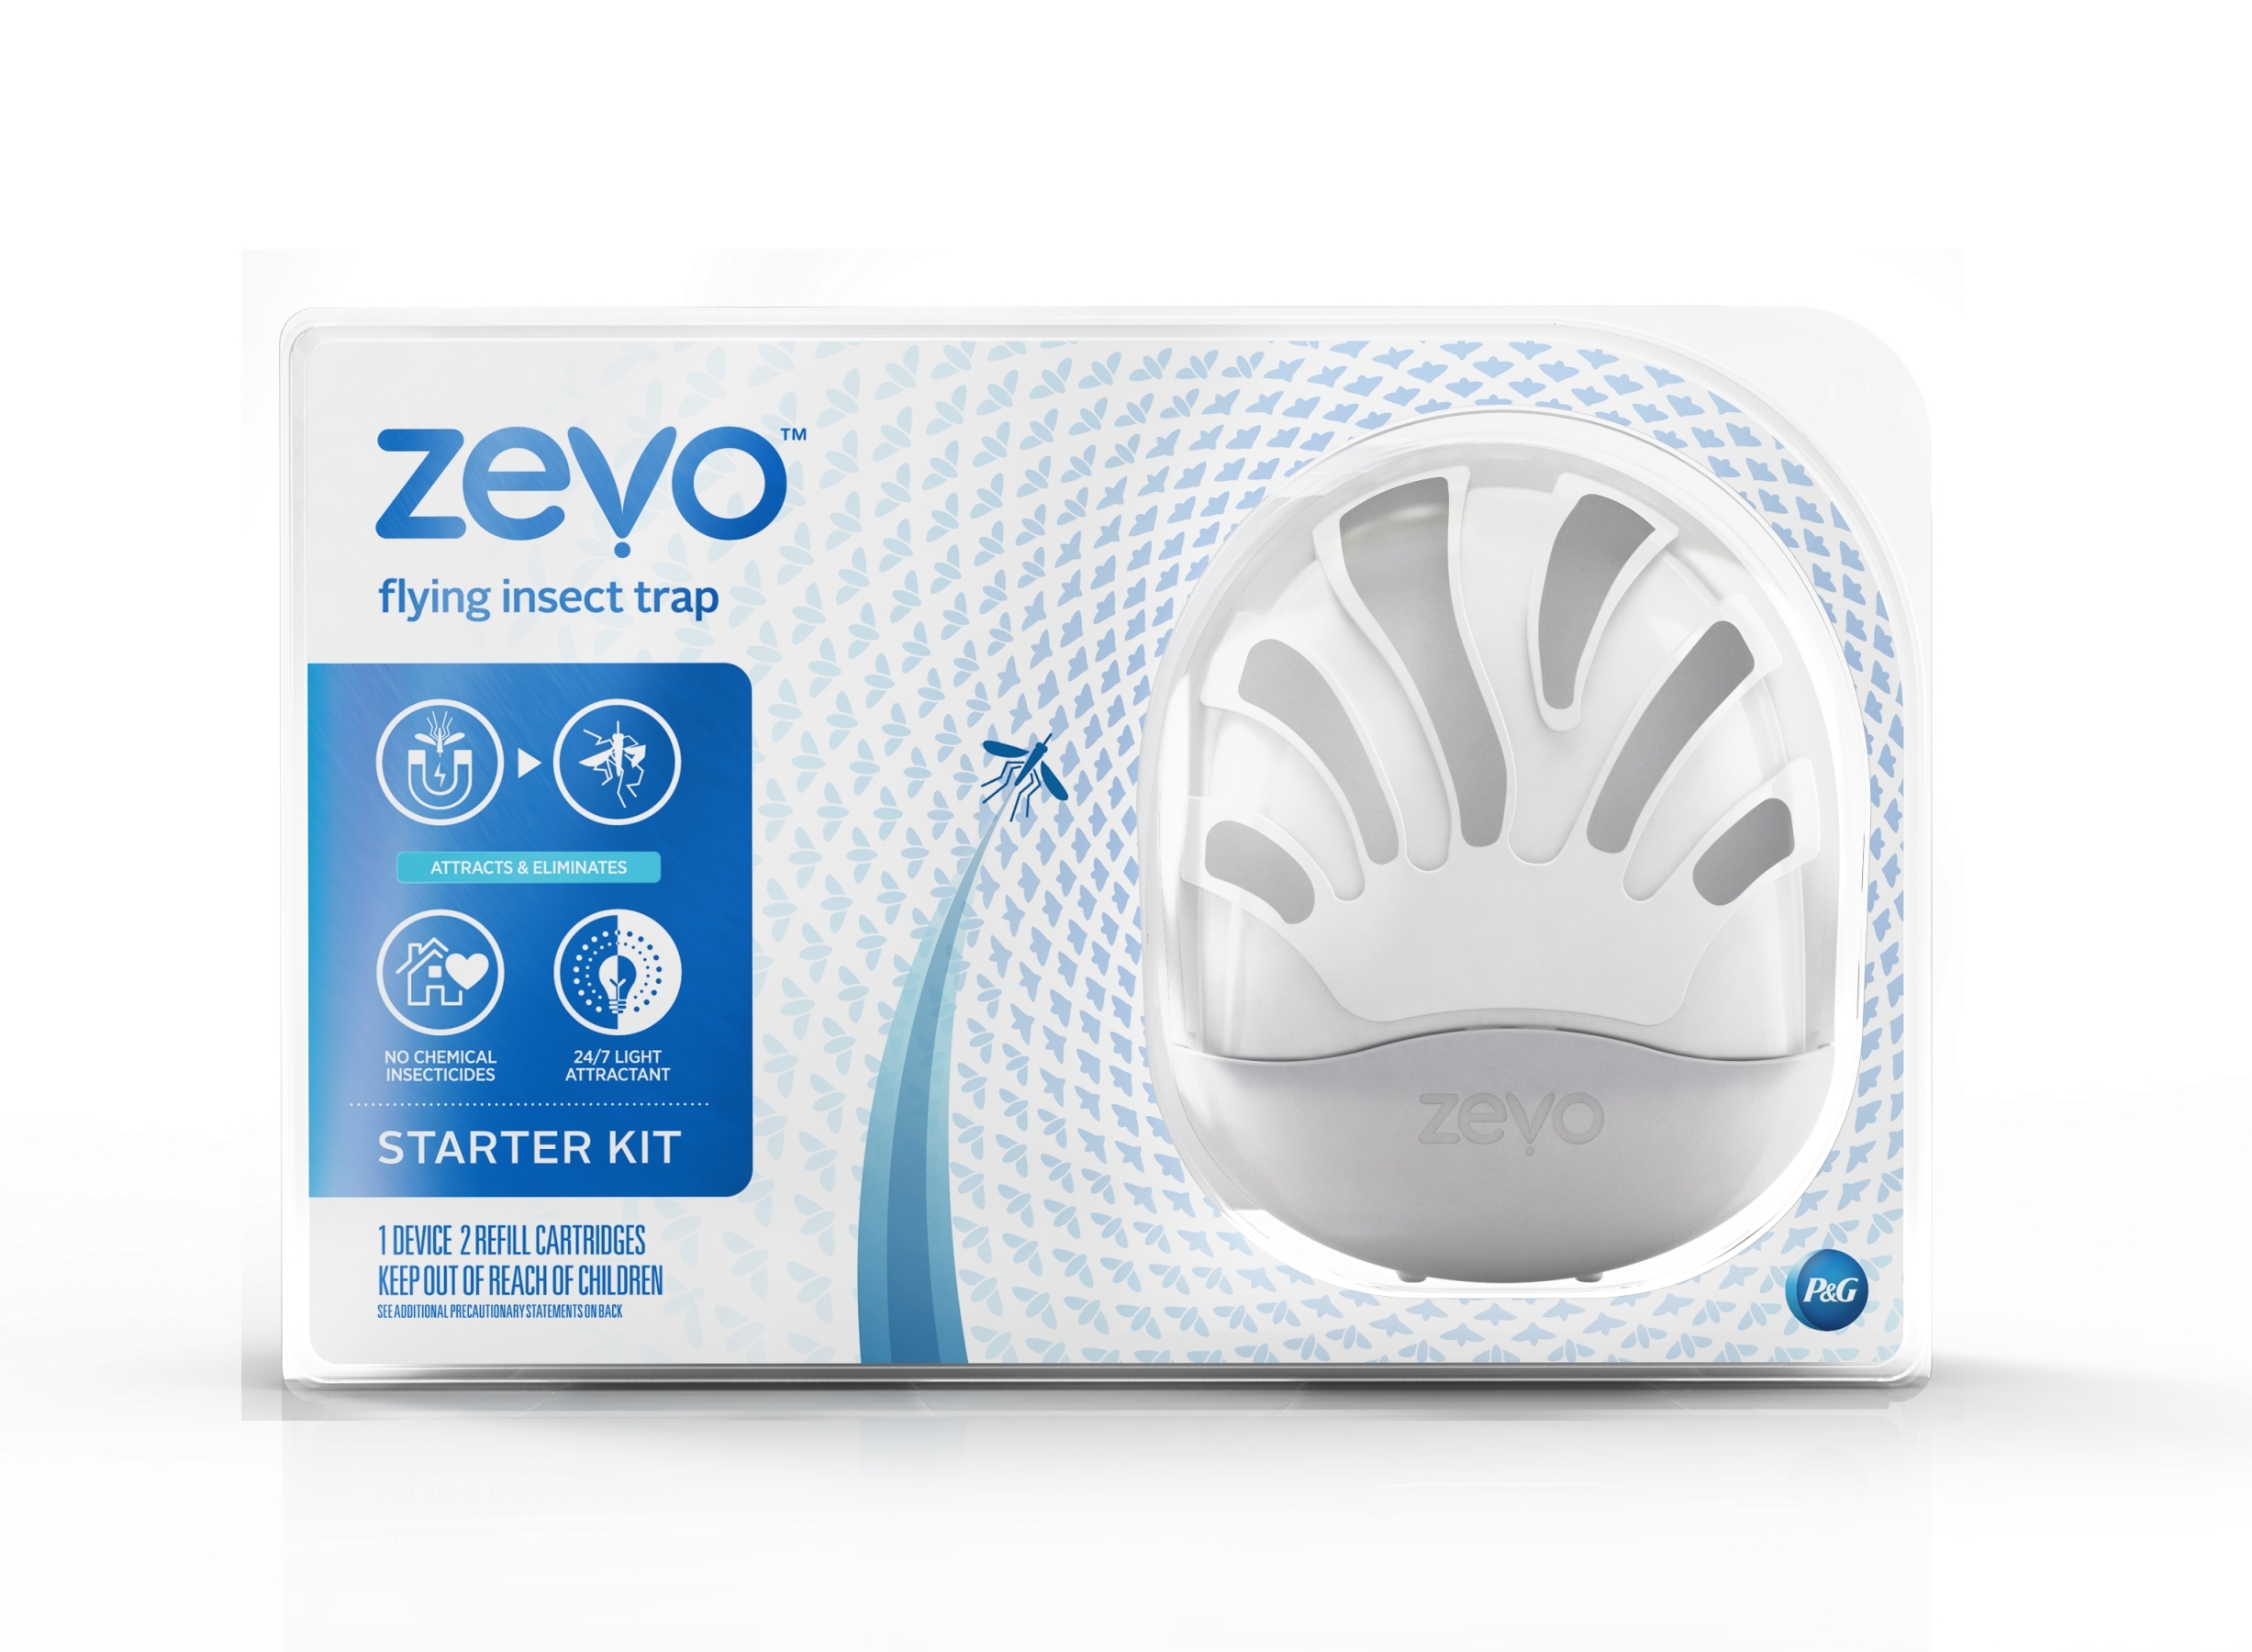 Procter & Gamble Introduces Zevo™ Flying Insect Trap for 24/7 Flying Insect  Protection in Your Home without Chemical Insecticides